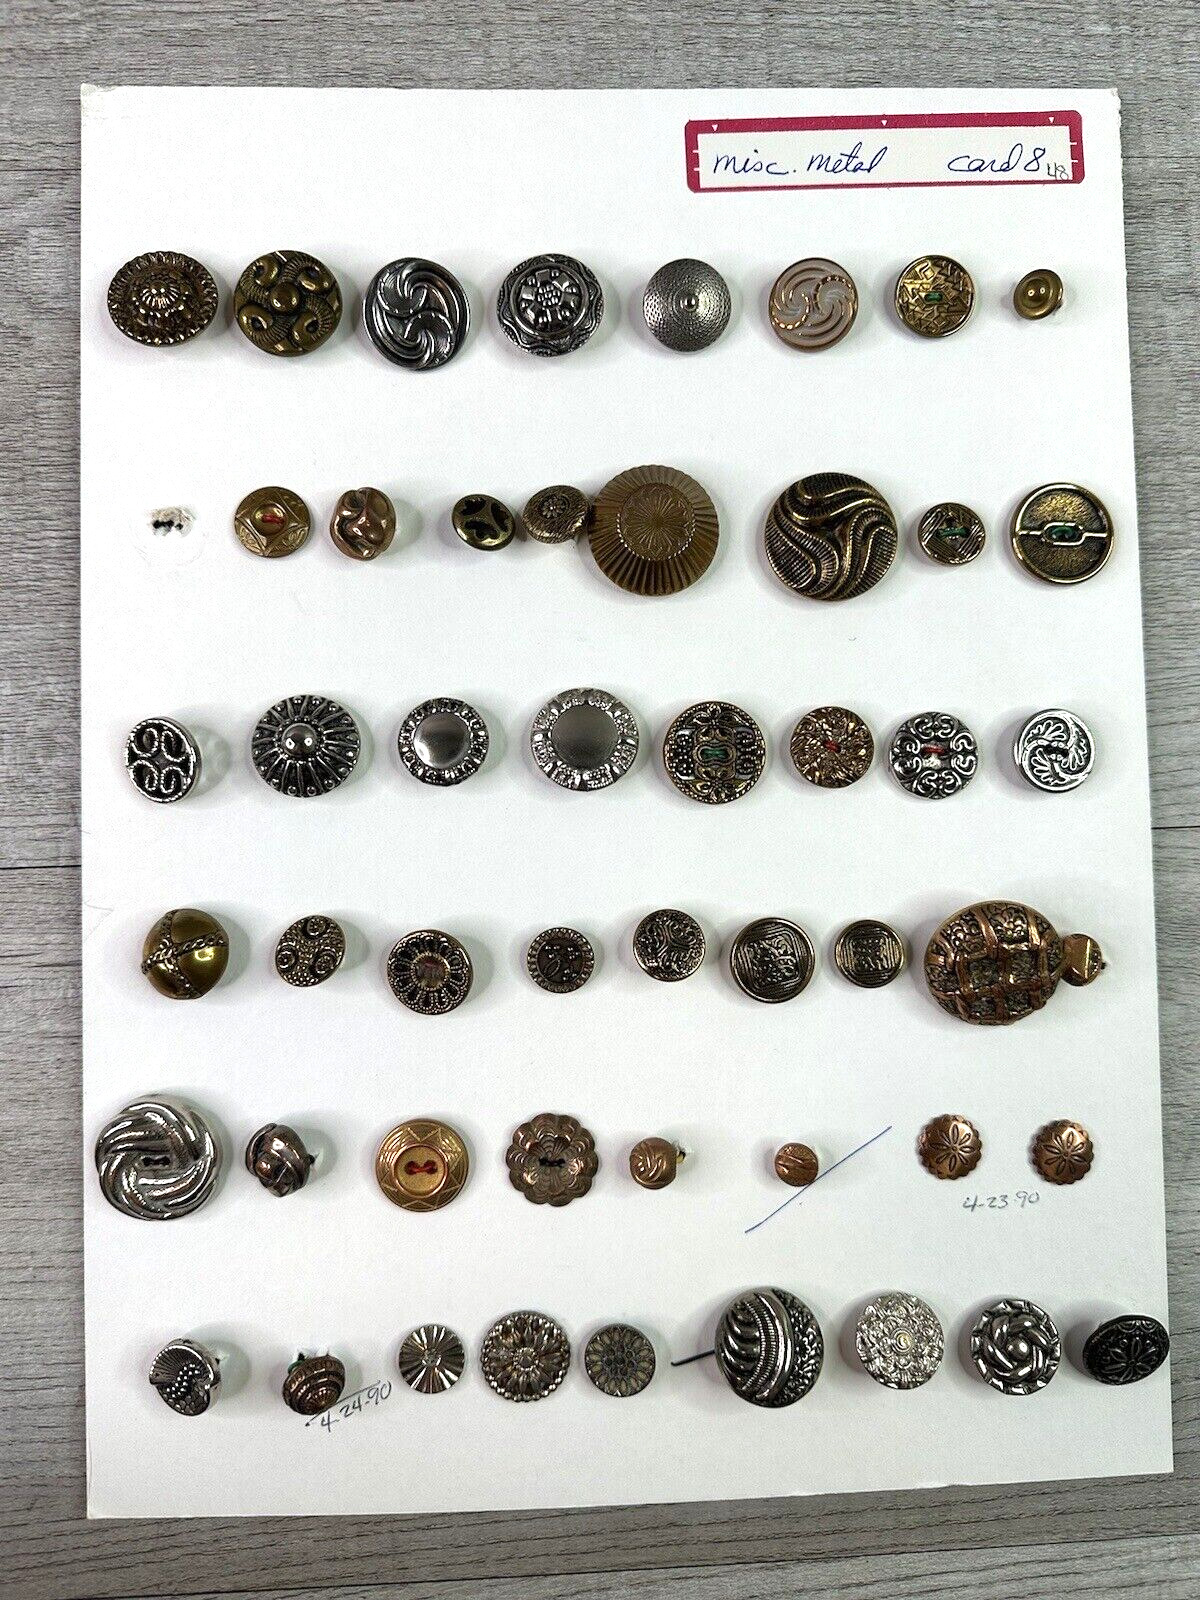 Collector Card of Vintage Misc. Metals Buttons Mixed Metals